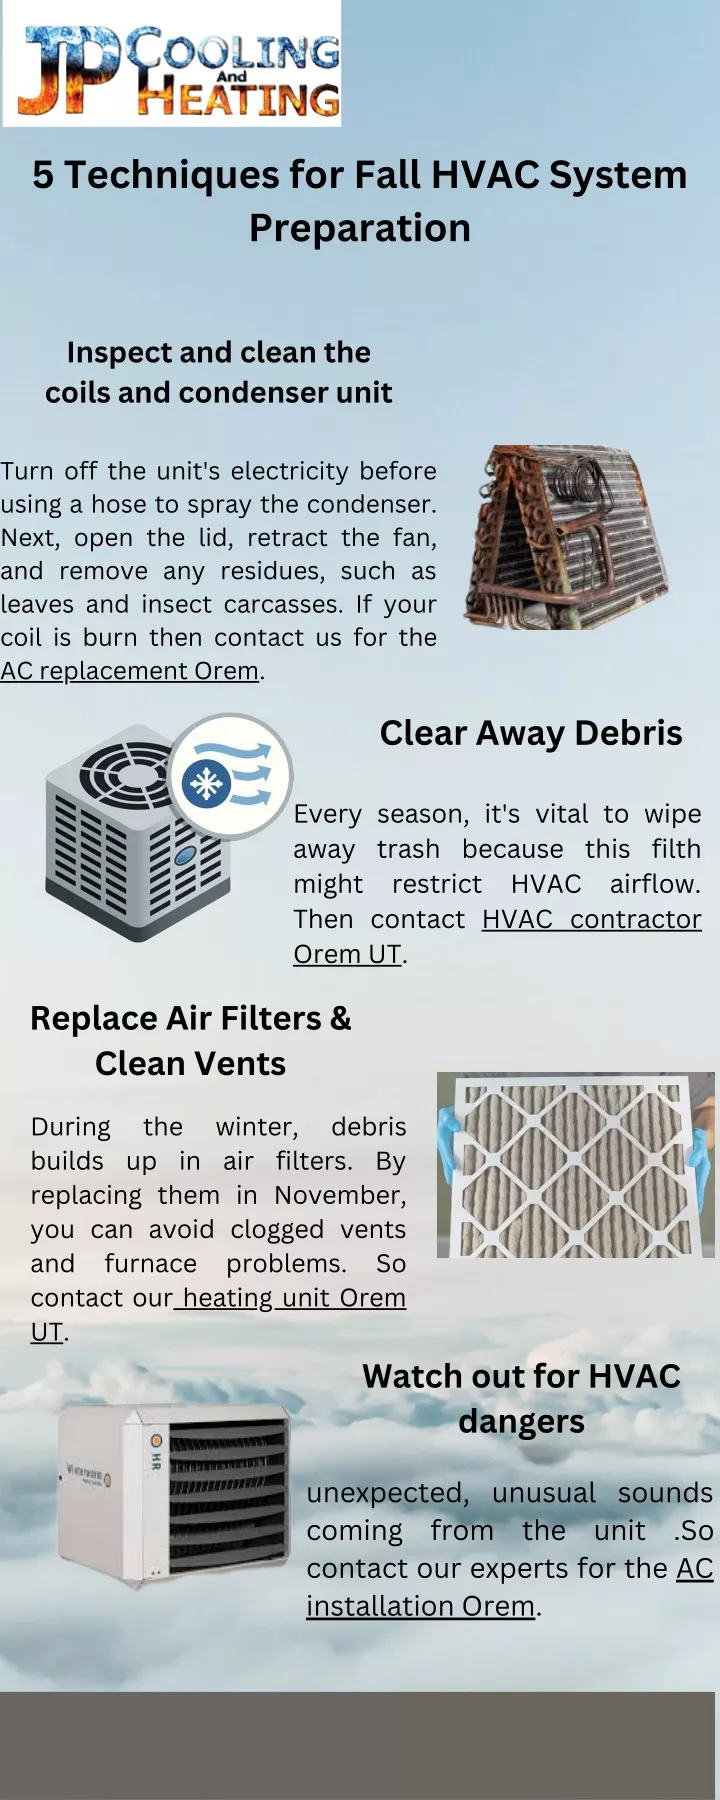 5 techniques for fall hvac system preparation